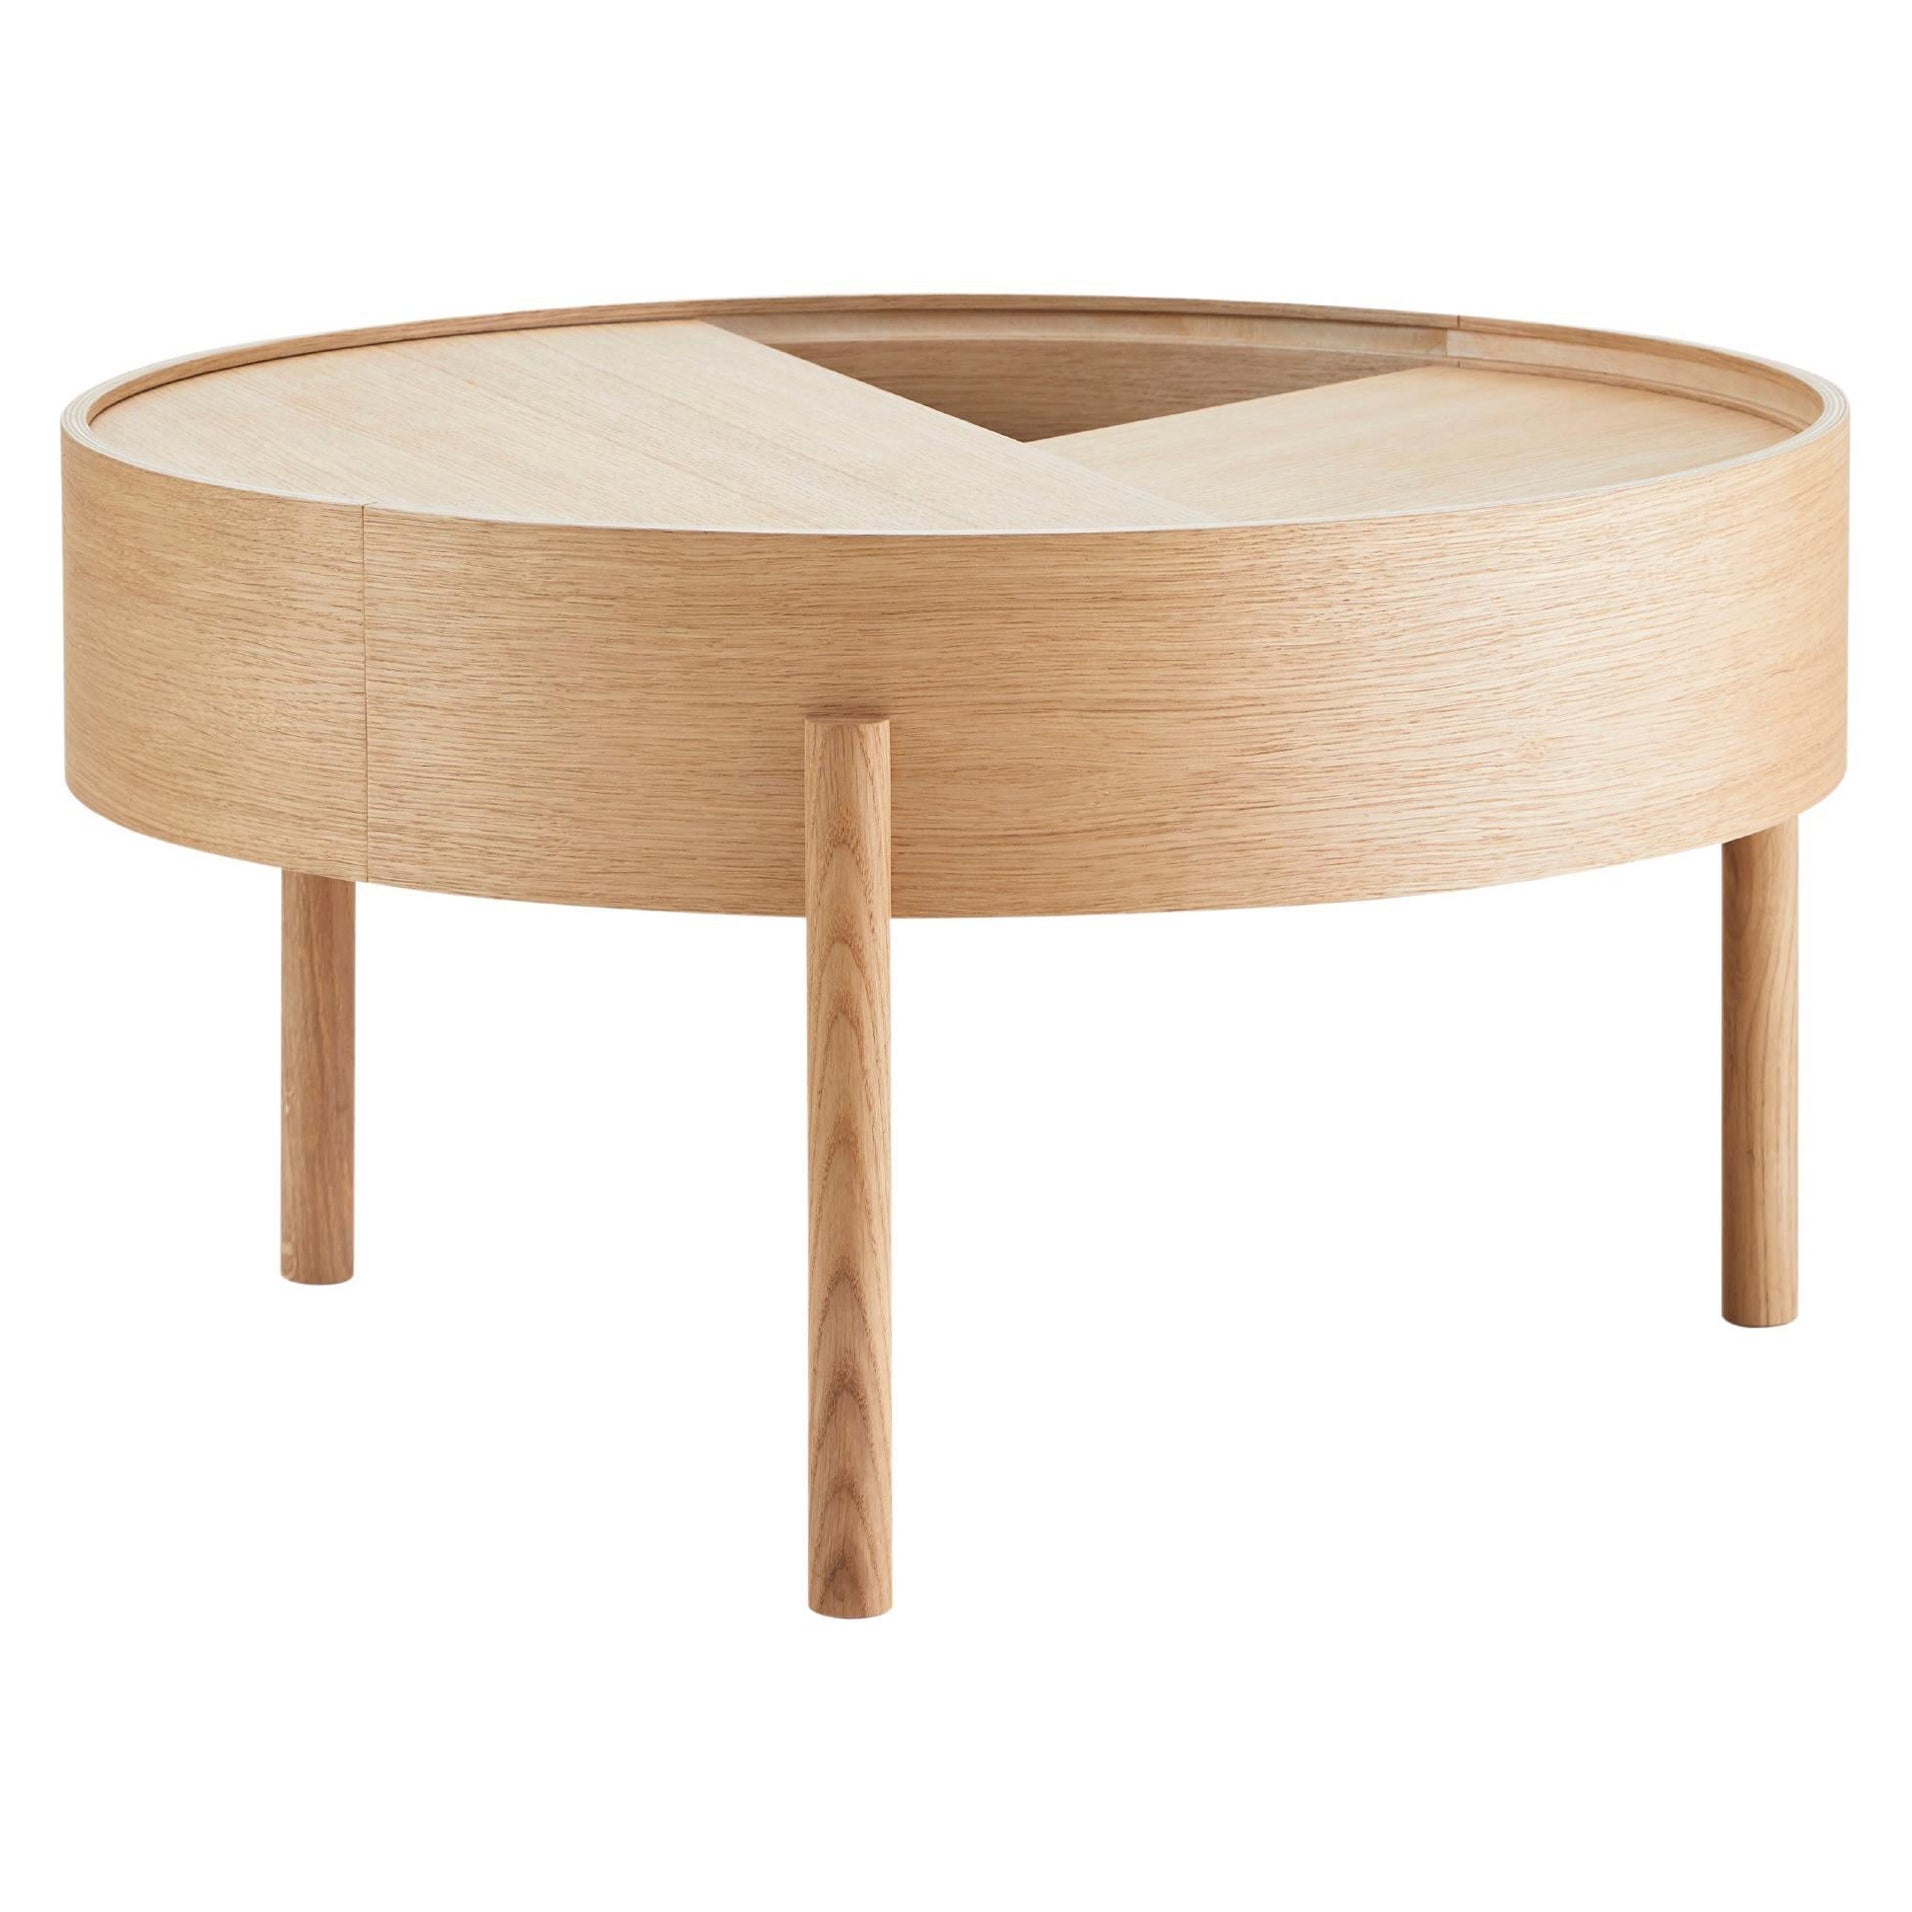 Oiled Oak Arc Coffee Table 66 by Ditte Vad and Julie Bertrup For Sale